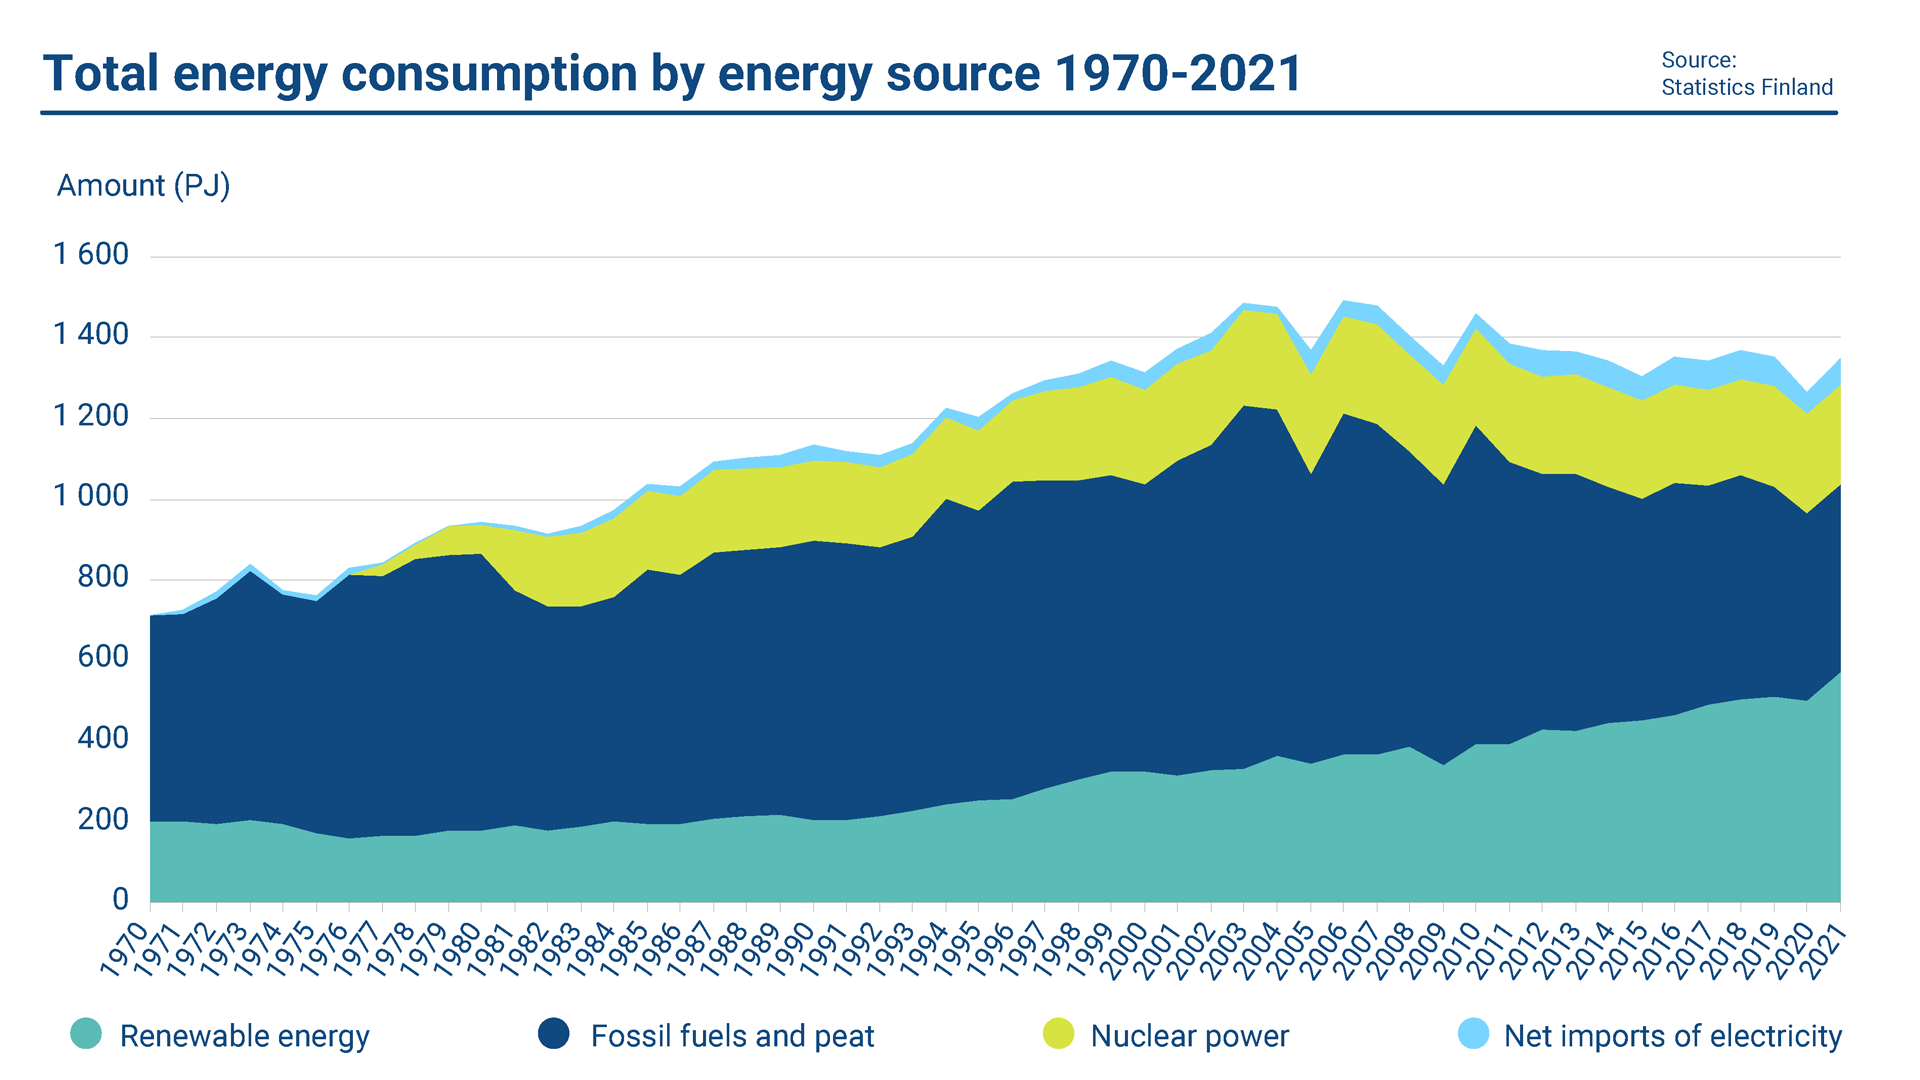 The image shows the total energy consumption by energy source from 1970. 